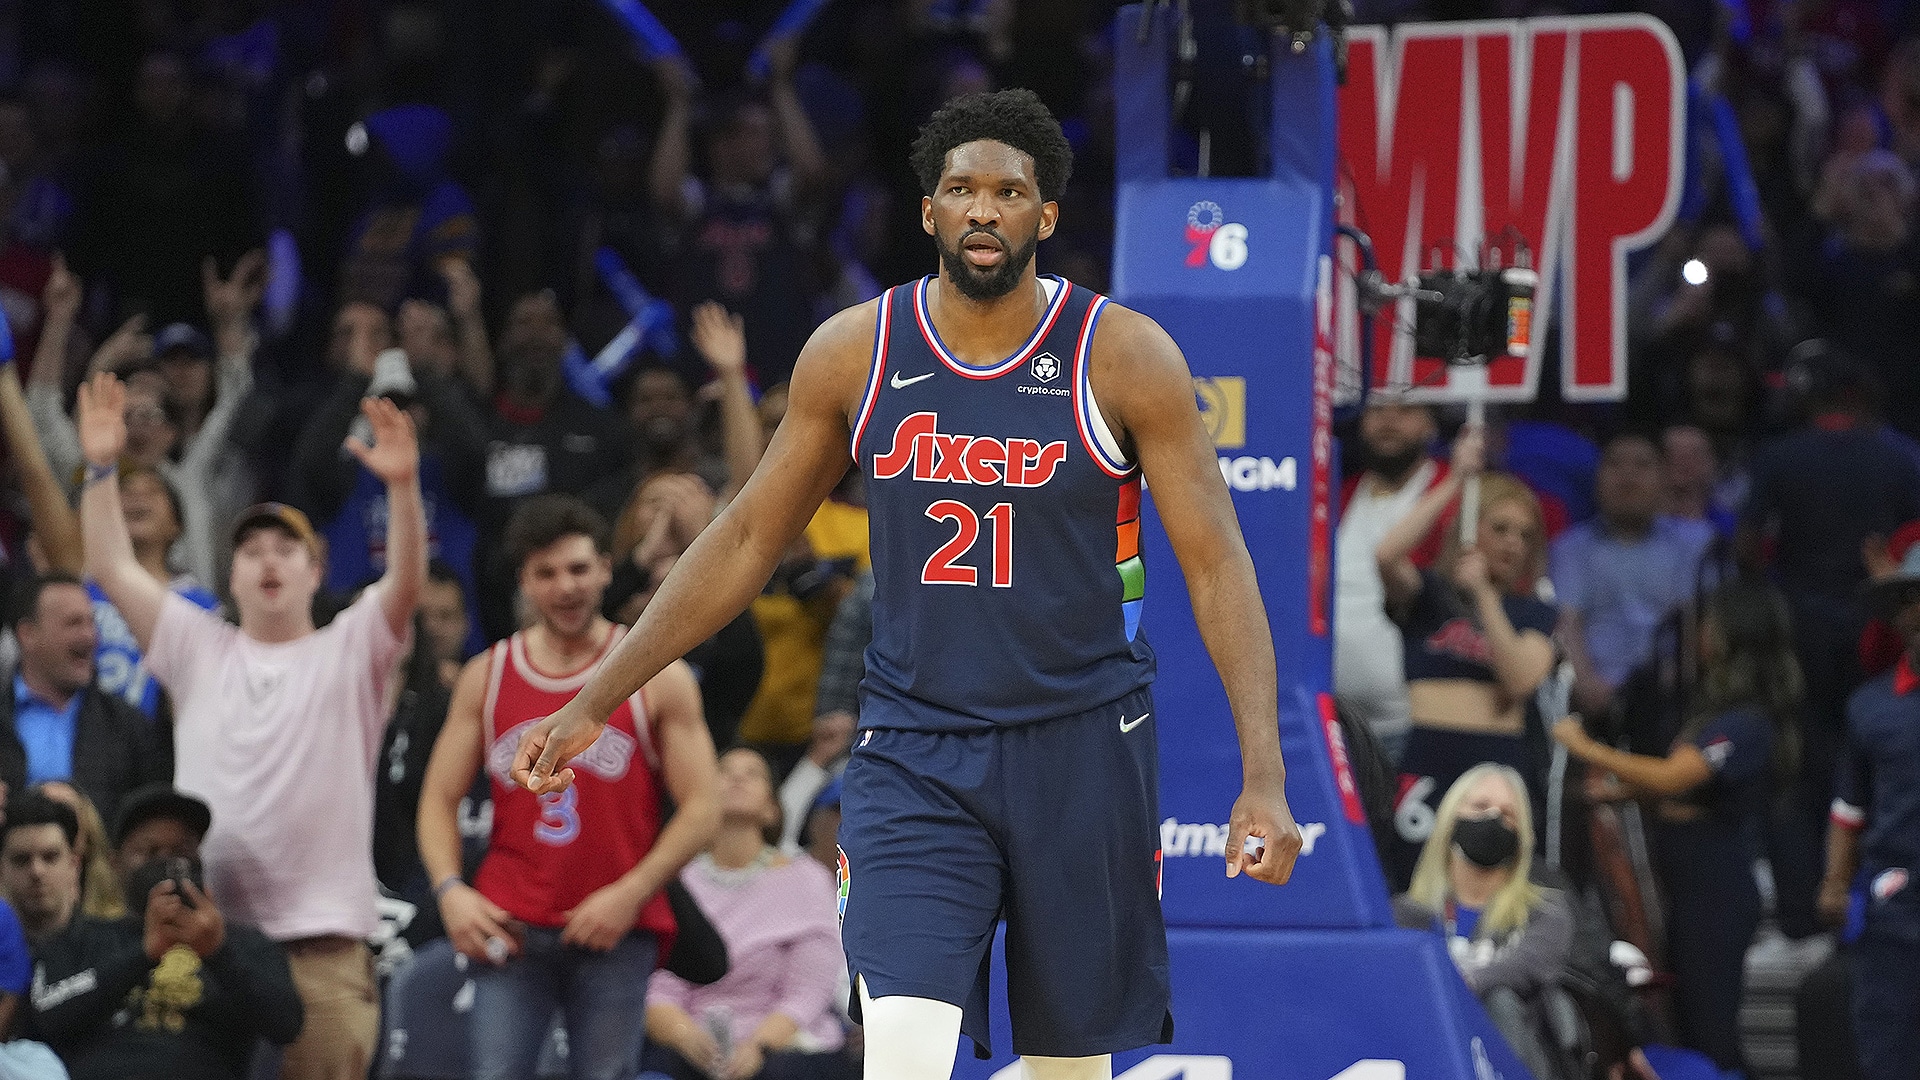 Joel Embiid wins scoring title for the first time